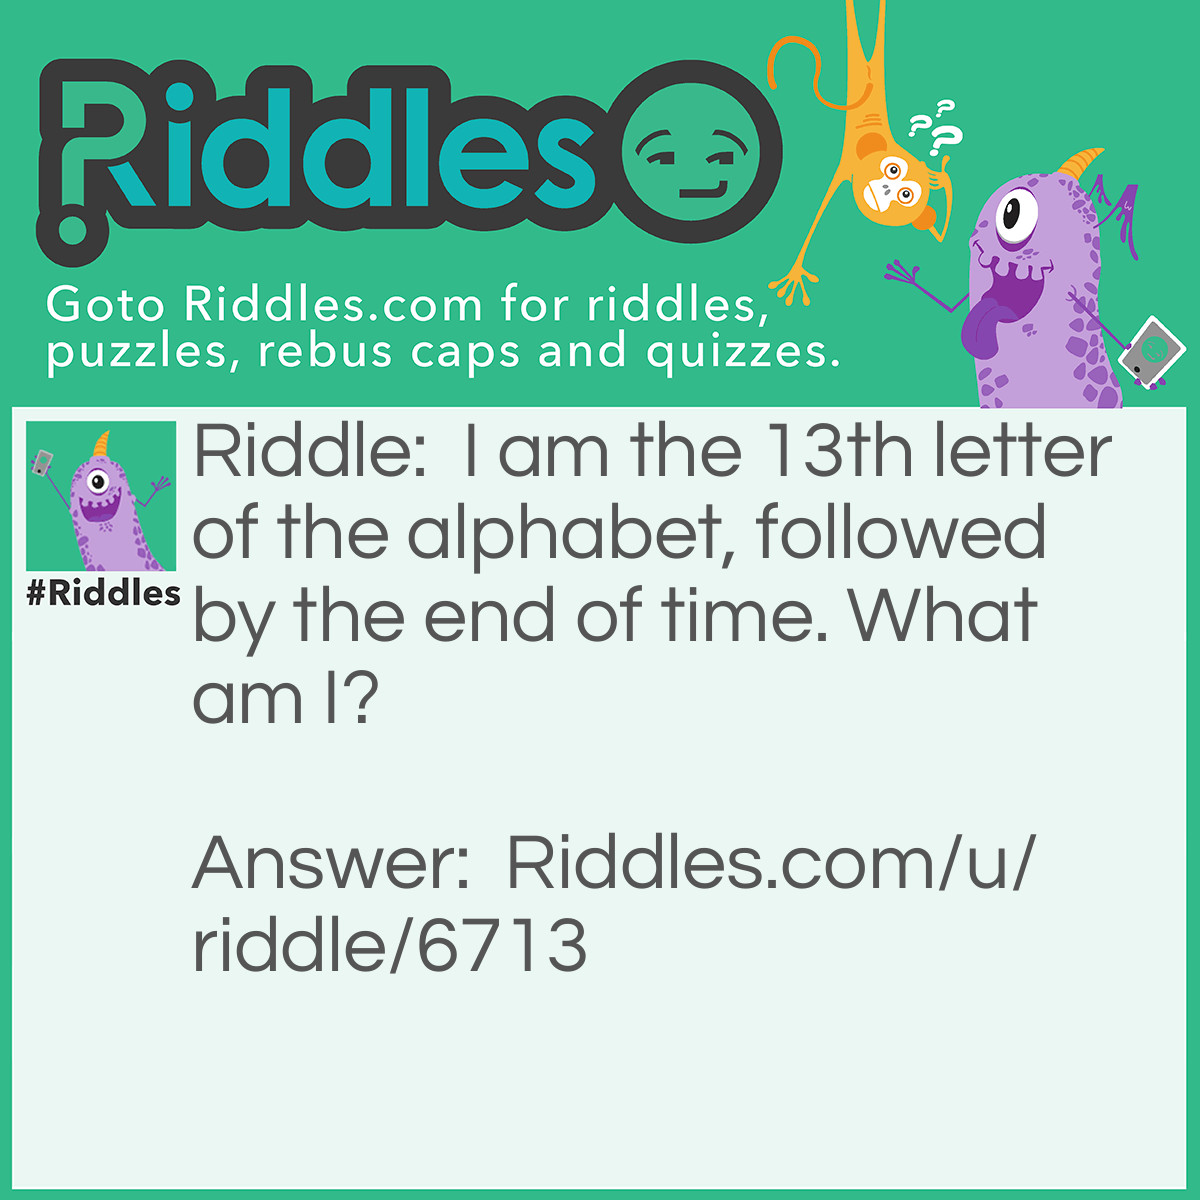 Riddle: I am the 13th letter of the alphabet, followed by the end of time. What am I? Answer: ME.